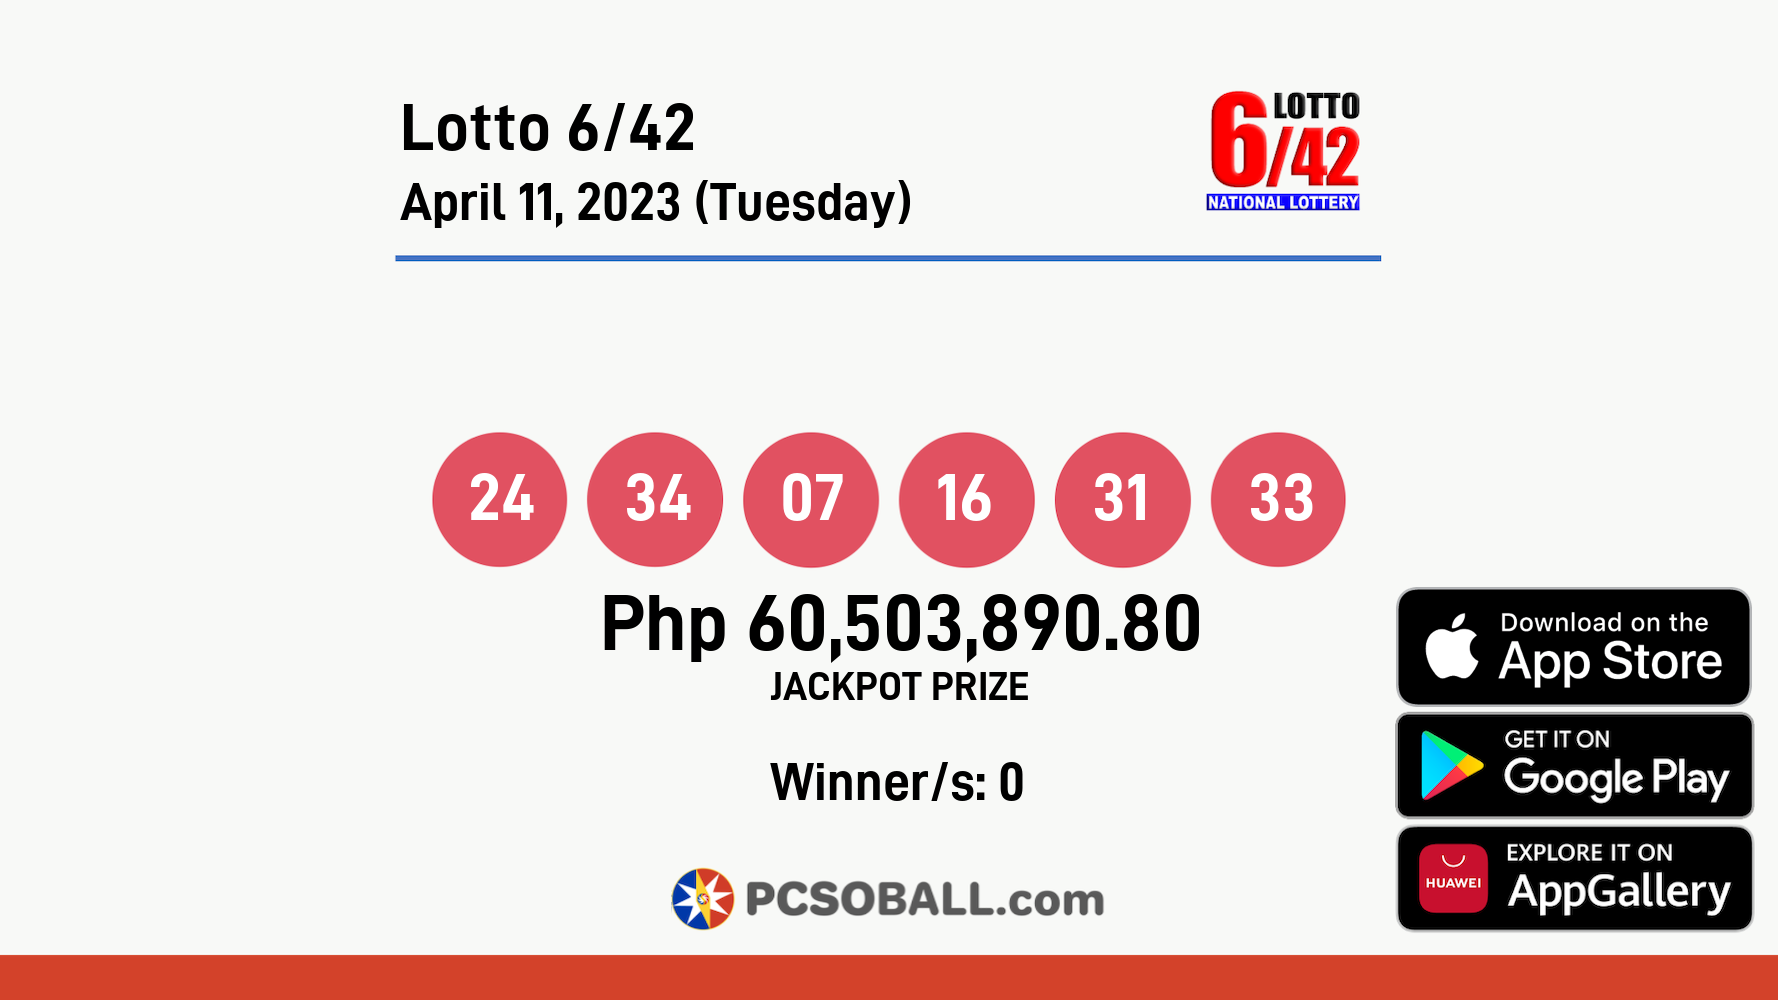 Lotto 6/42 April 11, 2023 (Tuesday) Result